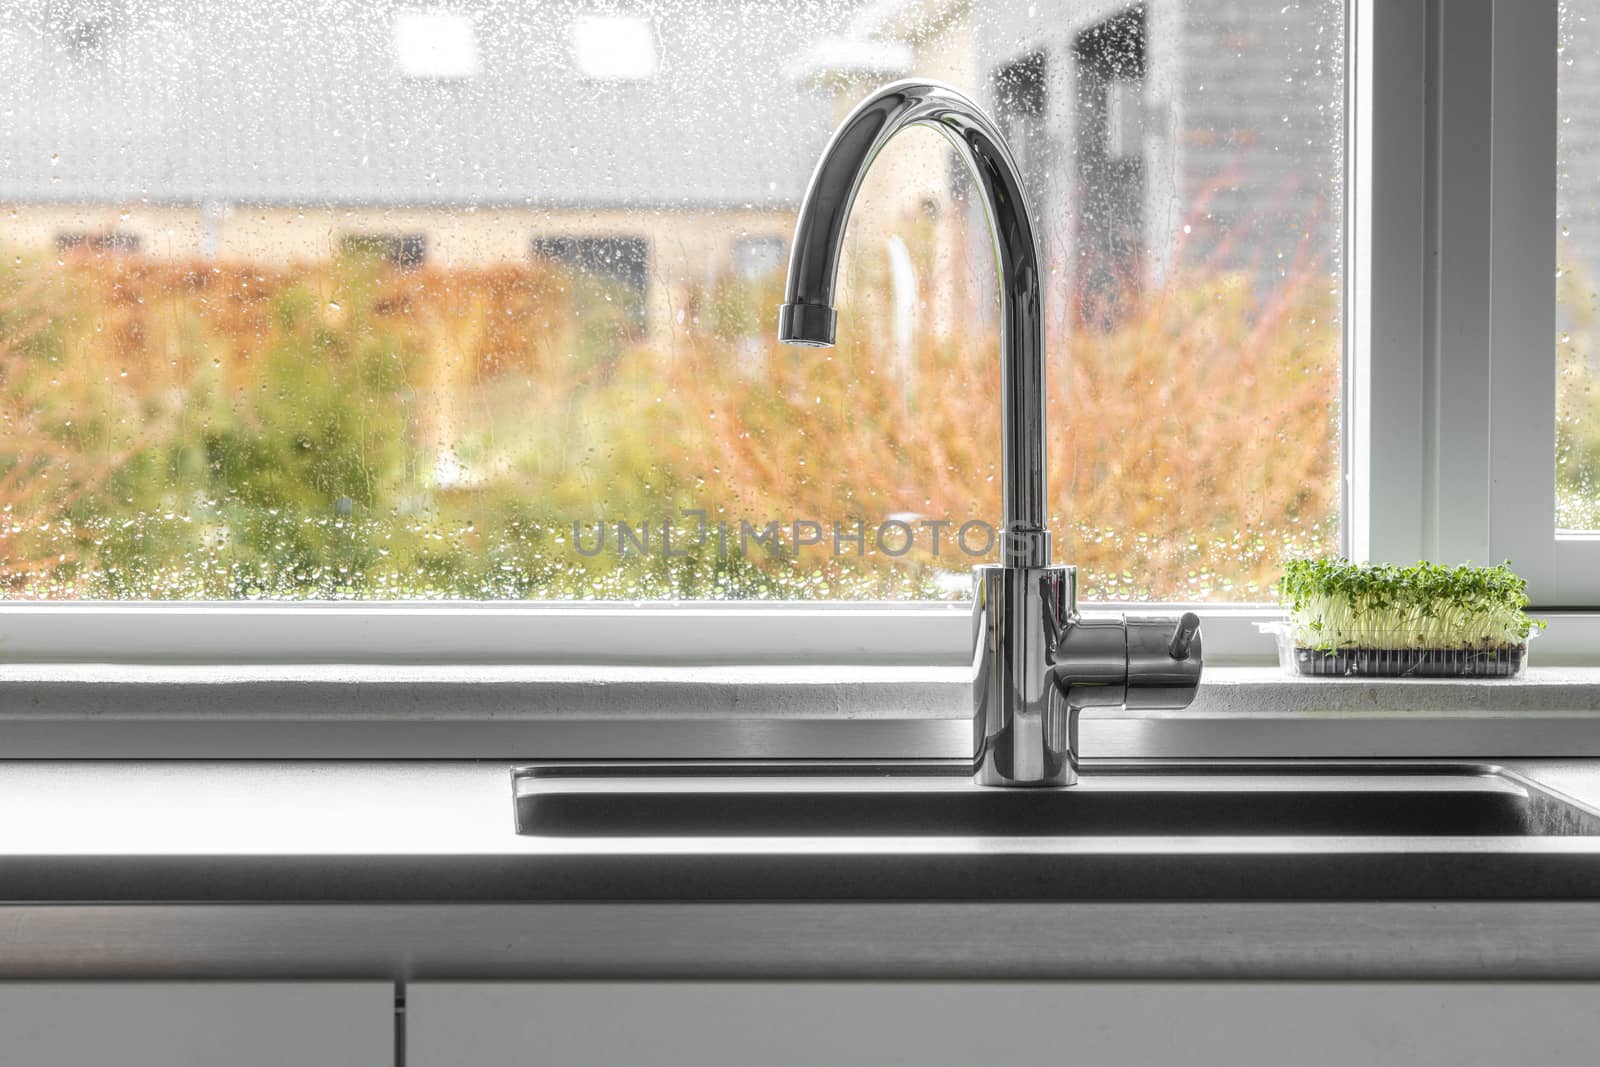 Chrome faucet by a kitchen sink with a wet window in the background